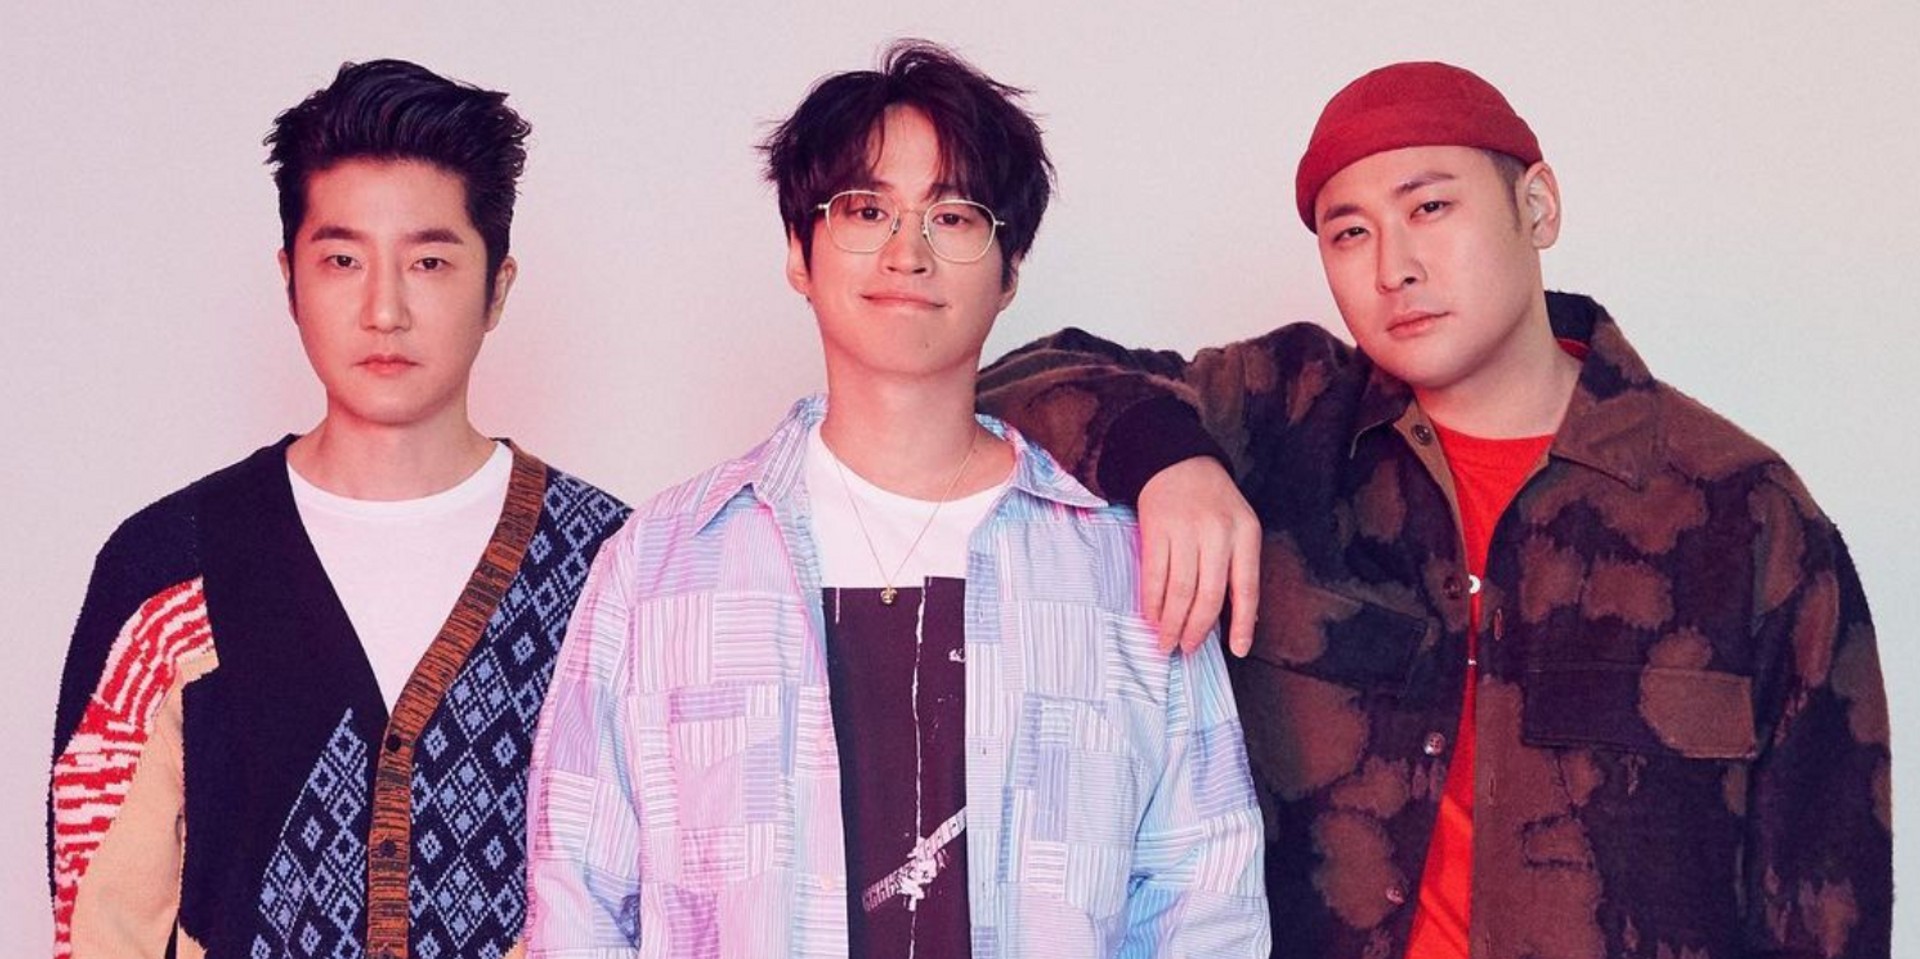 Epik High drops Part 1 of their new double album, 'Epik High Is Here,' featuring ZICO, CL, HEIZE, Nucksal, Kim Sawol, and Changmo